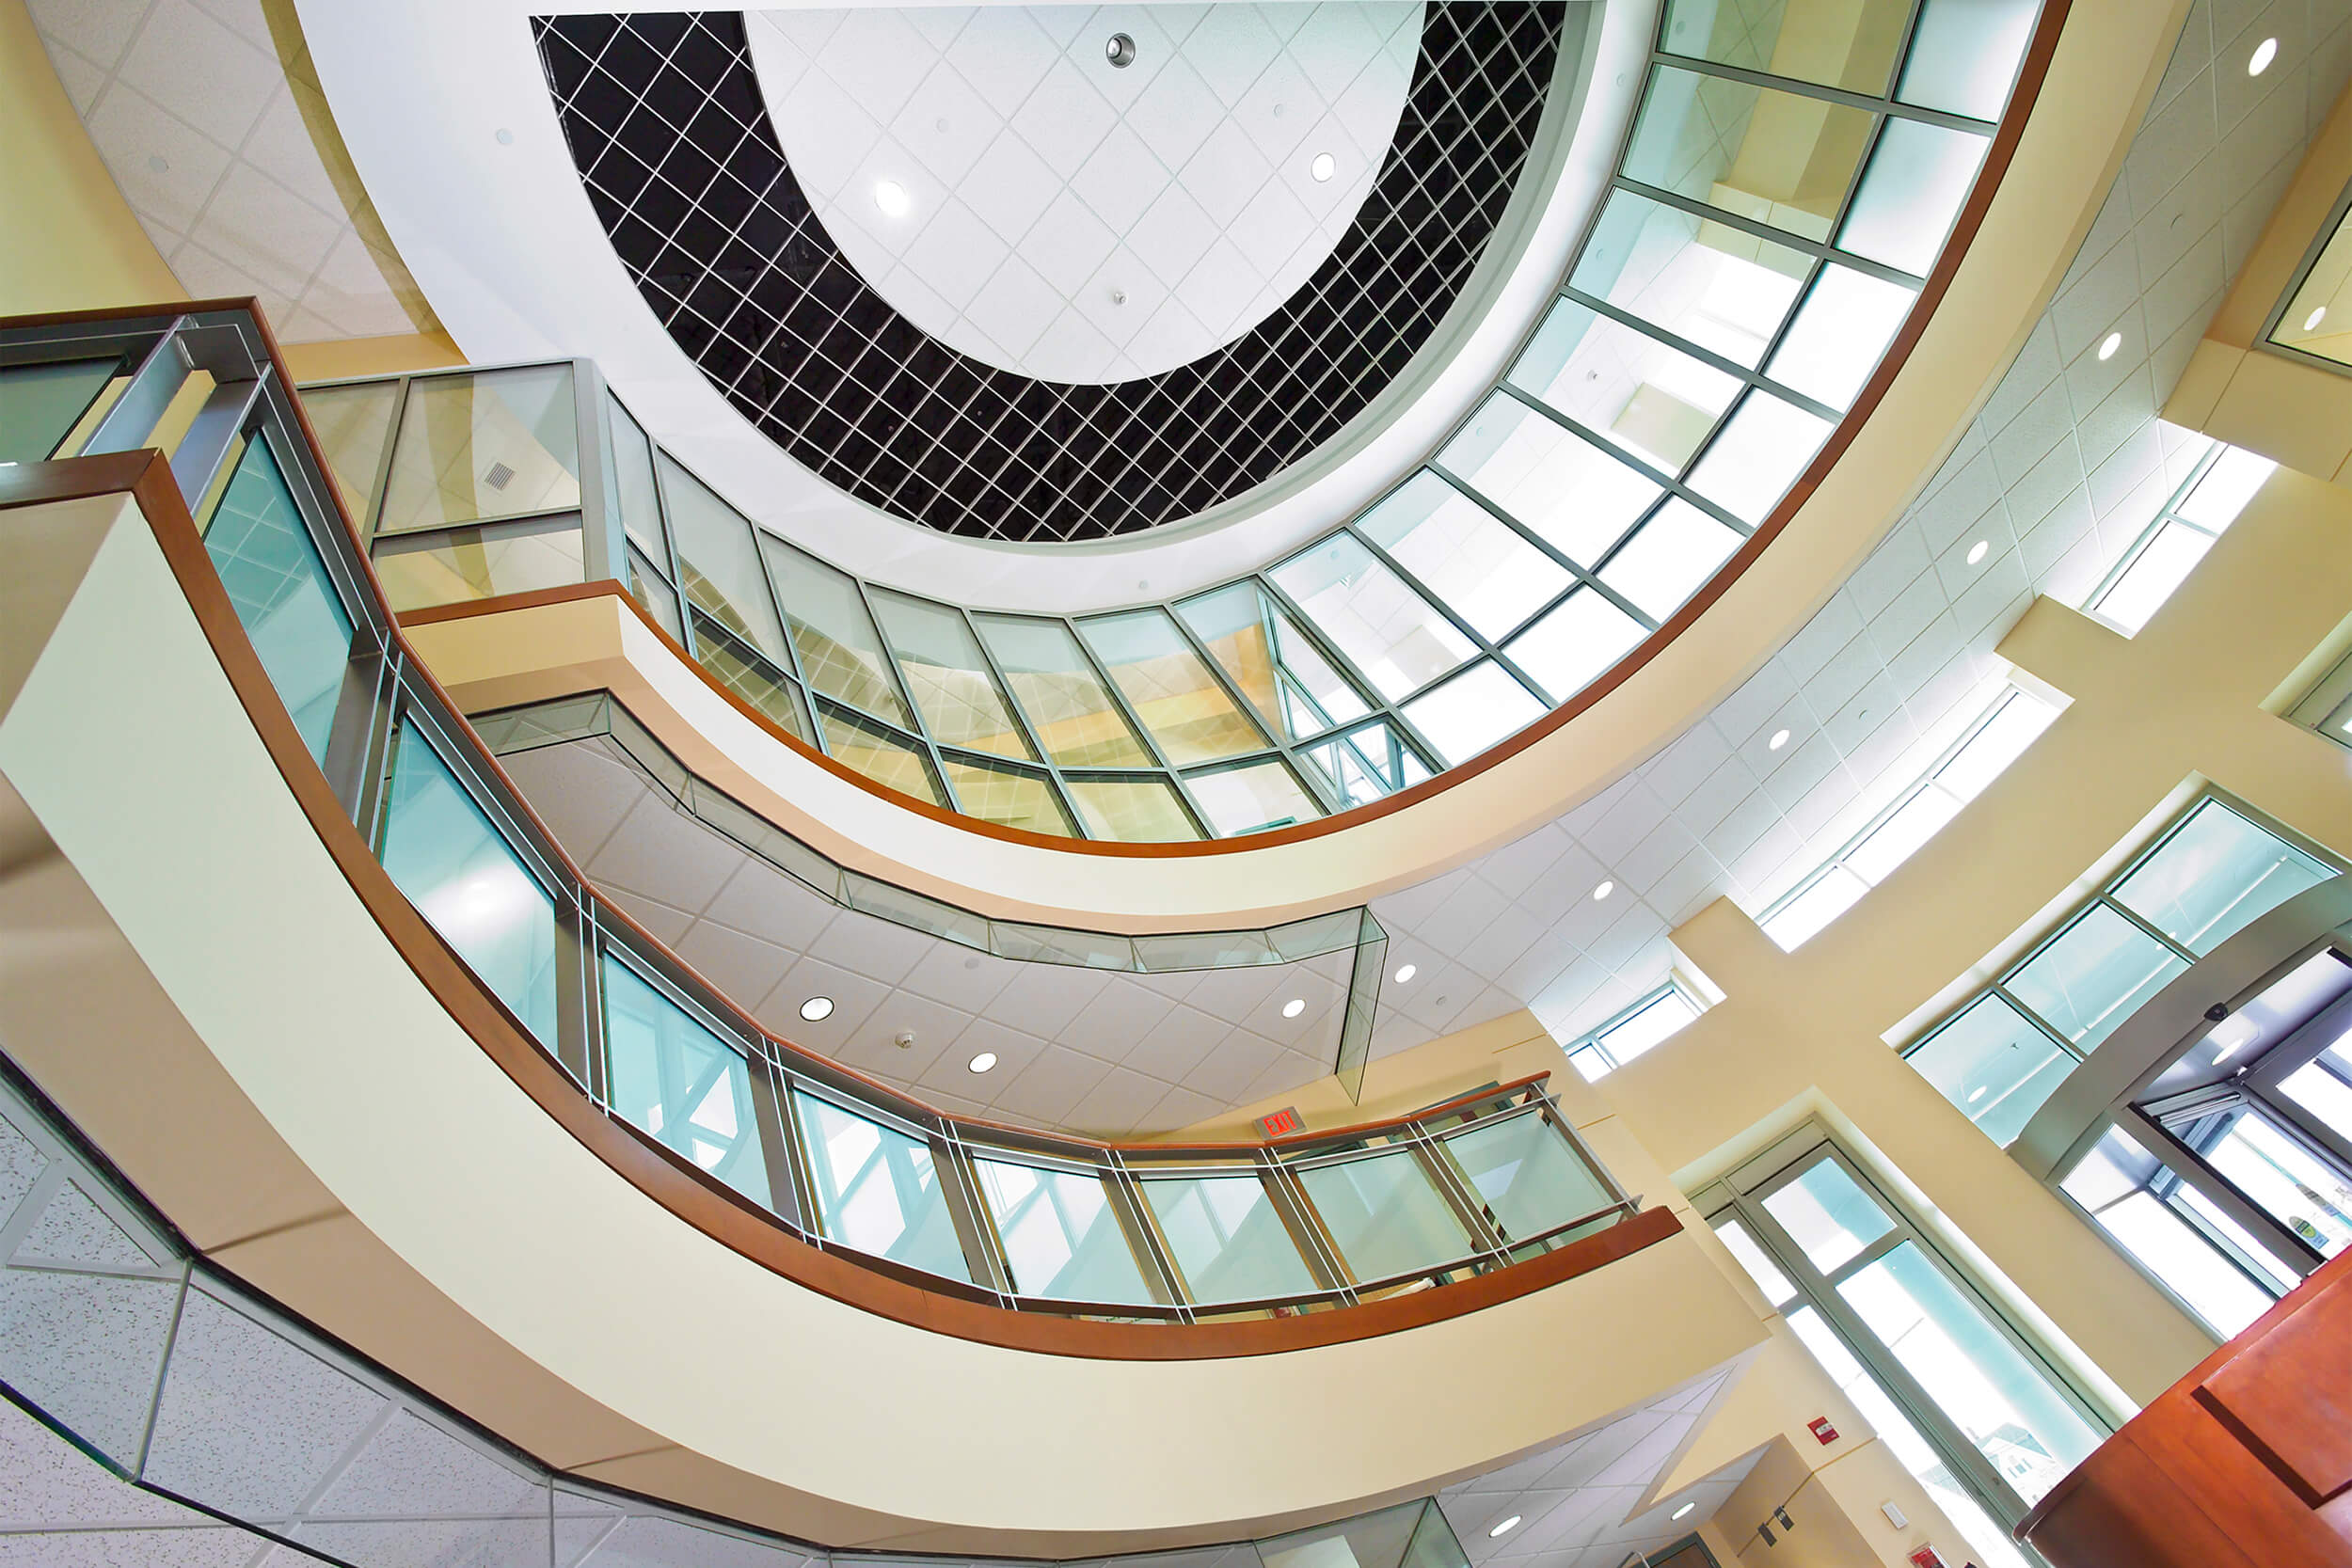 Upwards angled interior view of the atrium lobby at a medical center. Multiple floors can be seen with glass balcony barriers.